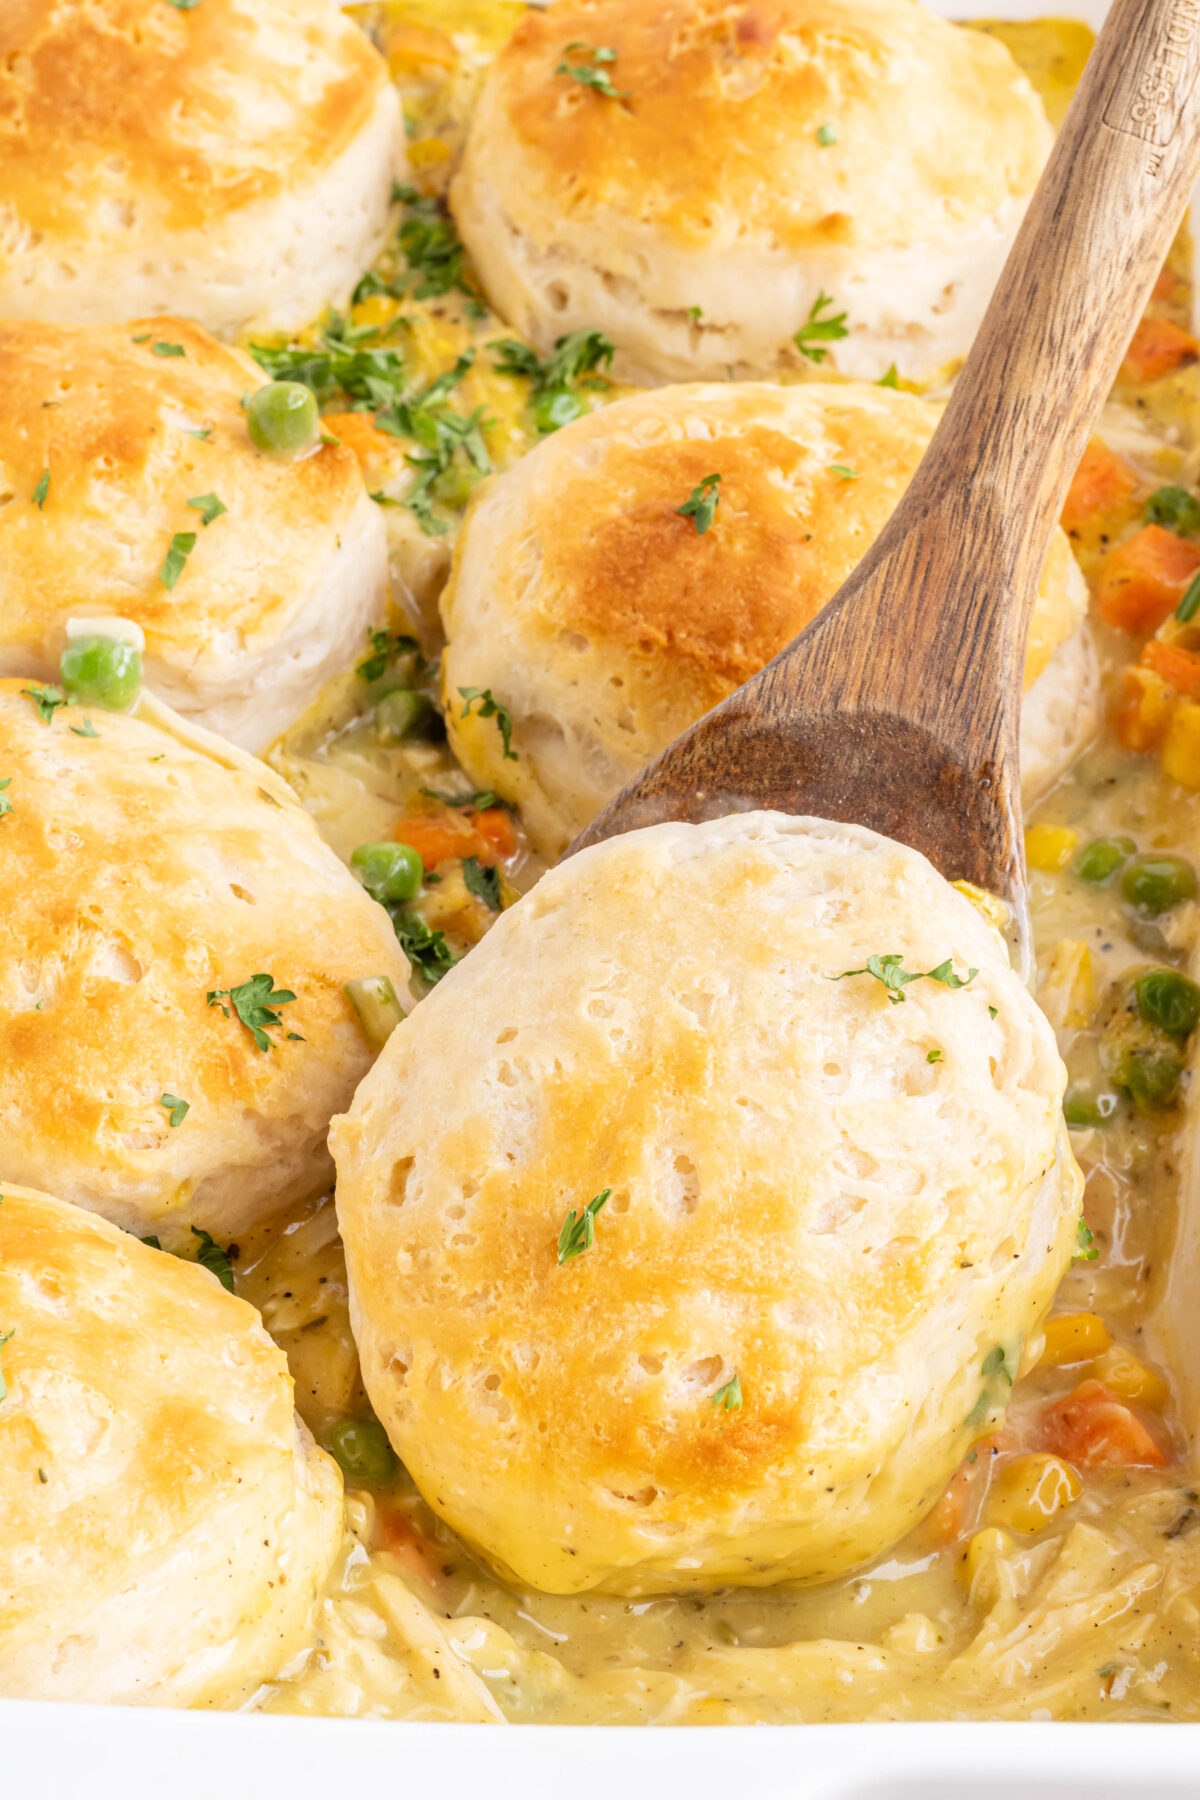 Get your family together for a comforting weeknight meal with this easy chicken pot pie casserole recipe. It's an effortless hearty meal!